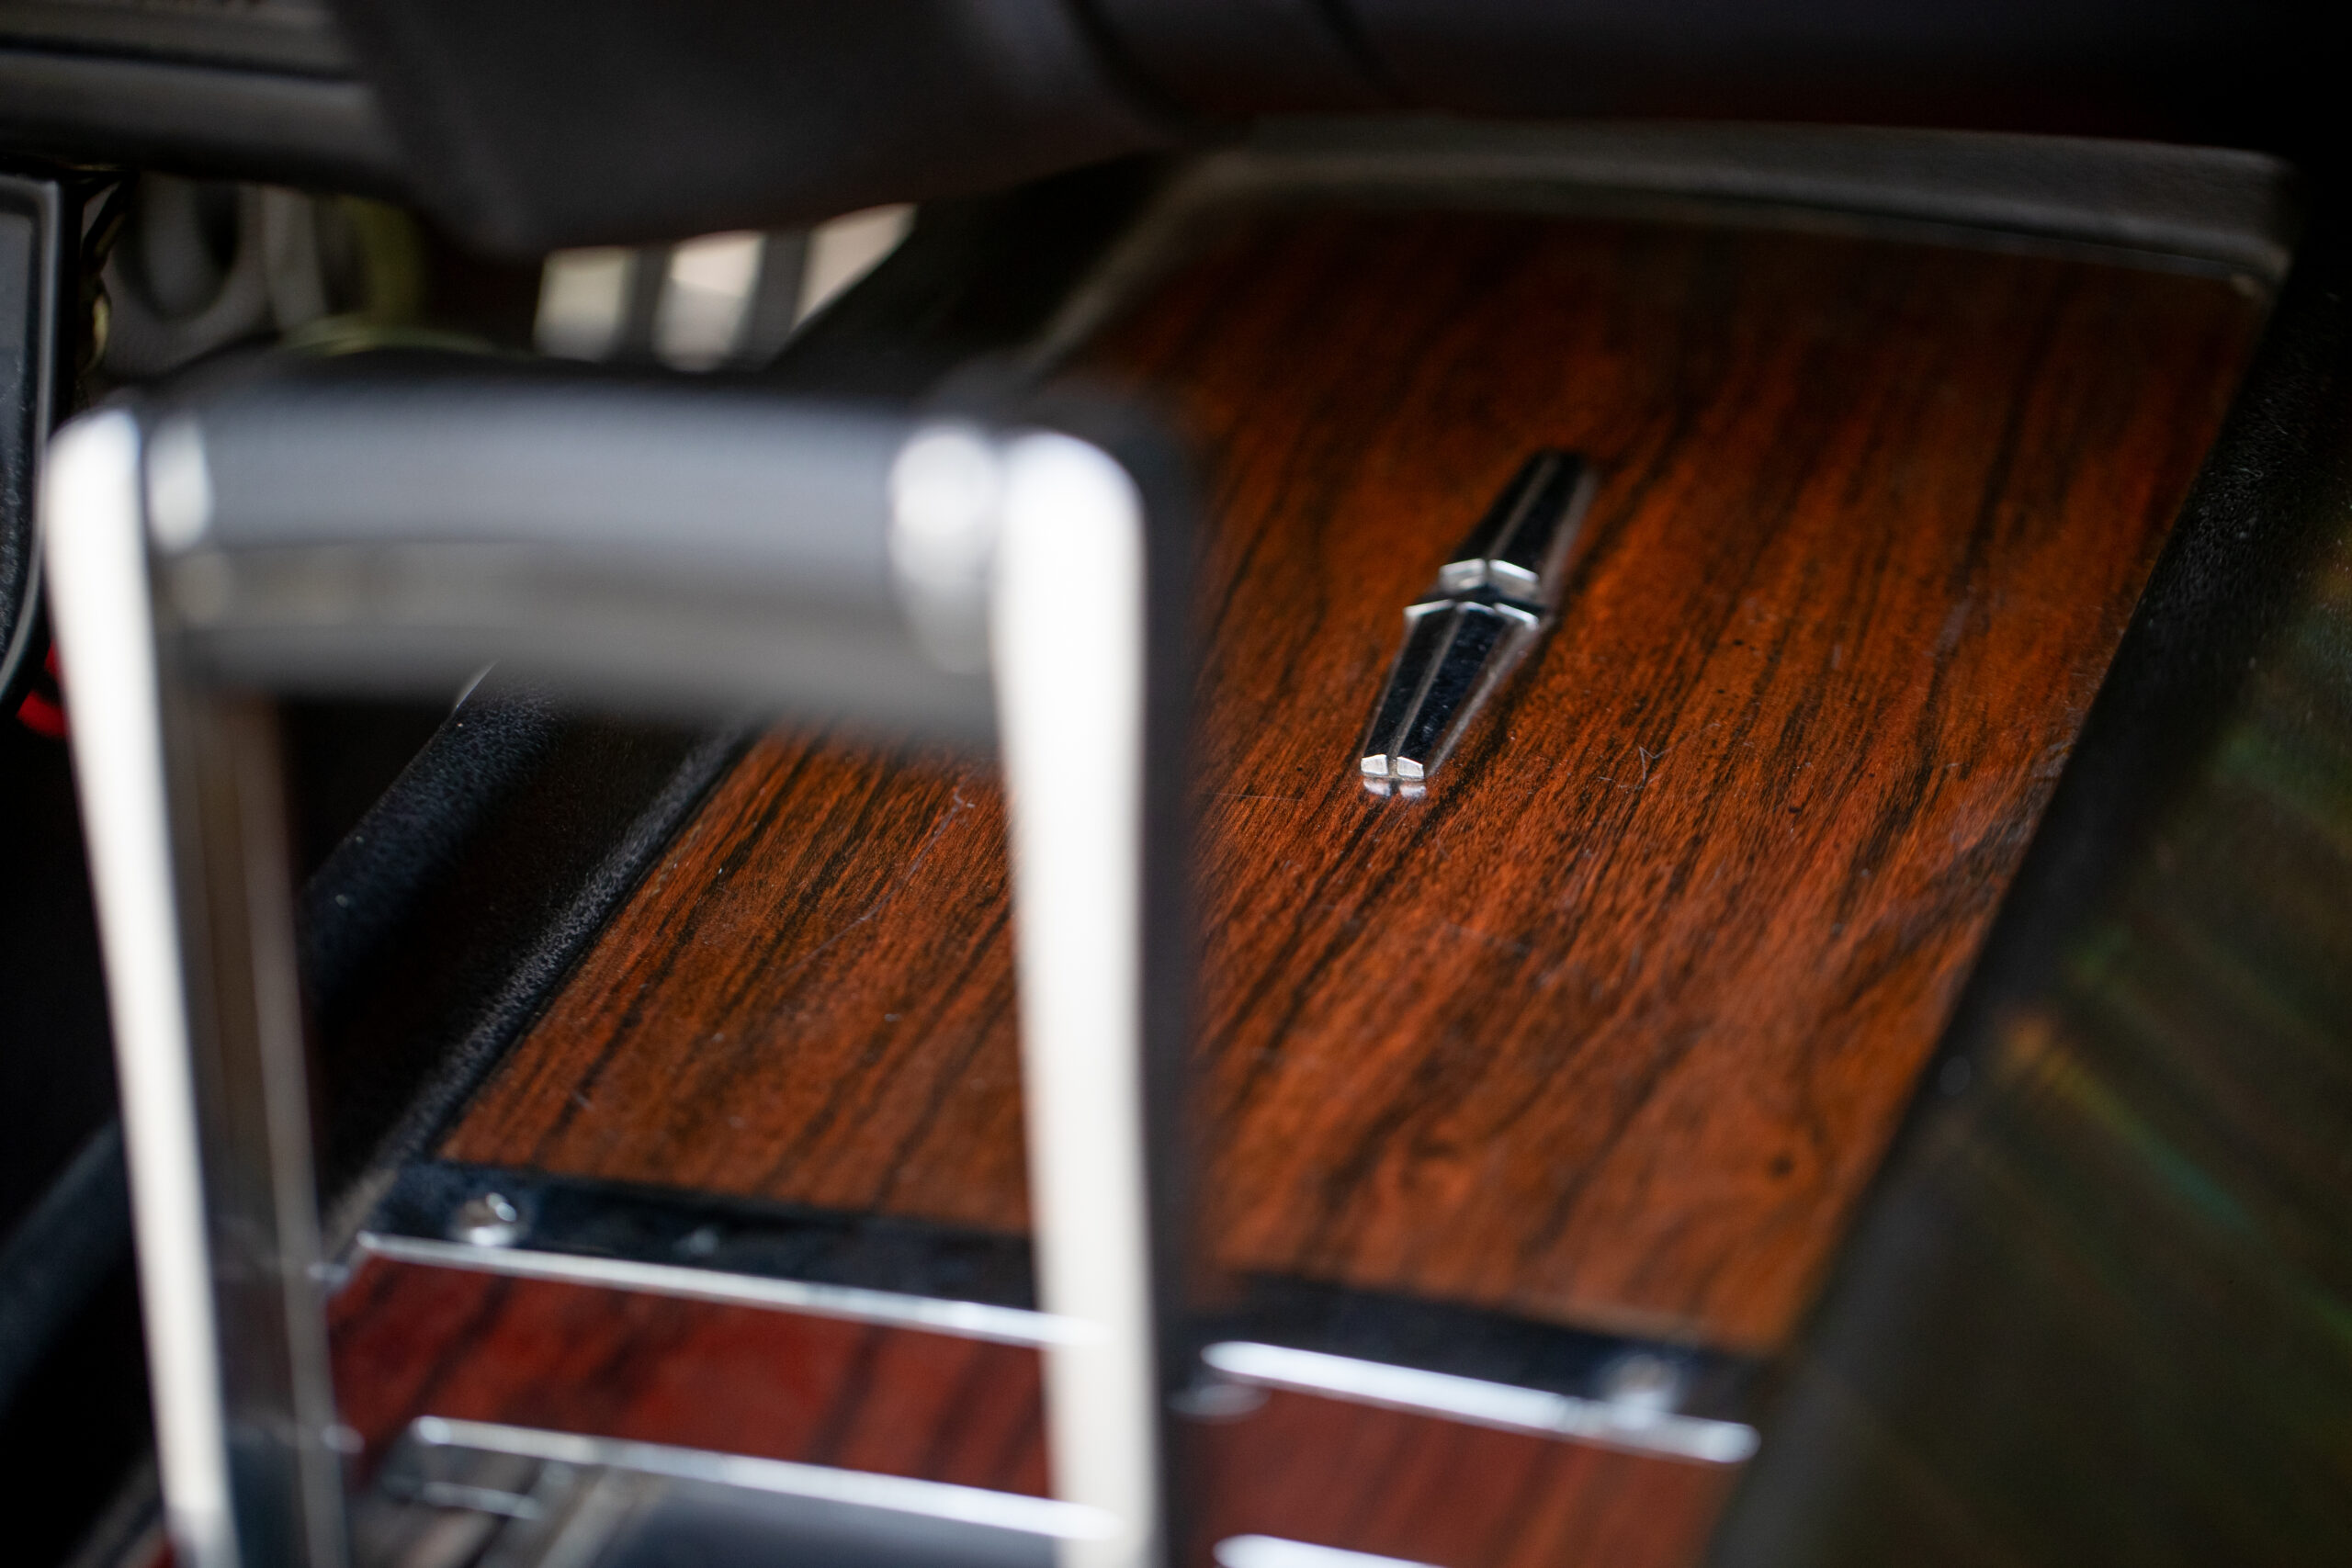 Close-up of a car's gear shift area featuring a wooden panel with a metallic emblem in the center, with part of the gear stick visible in the foreground.